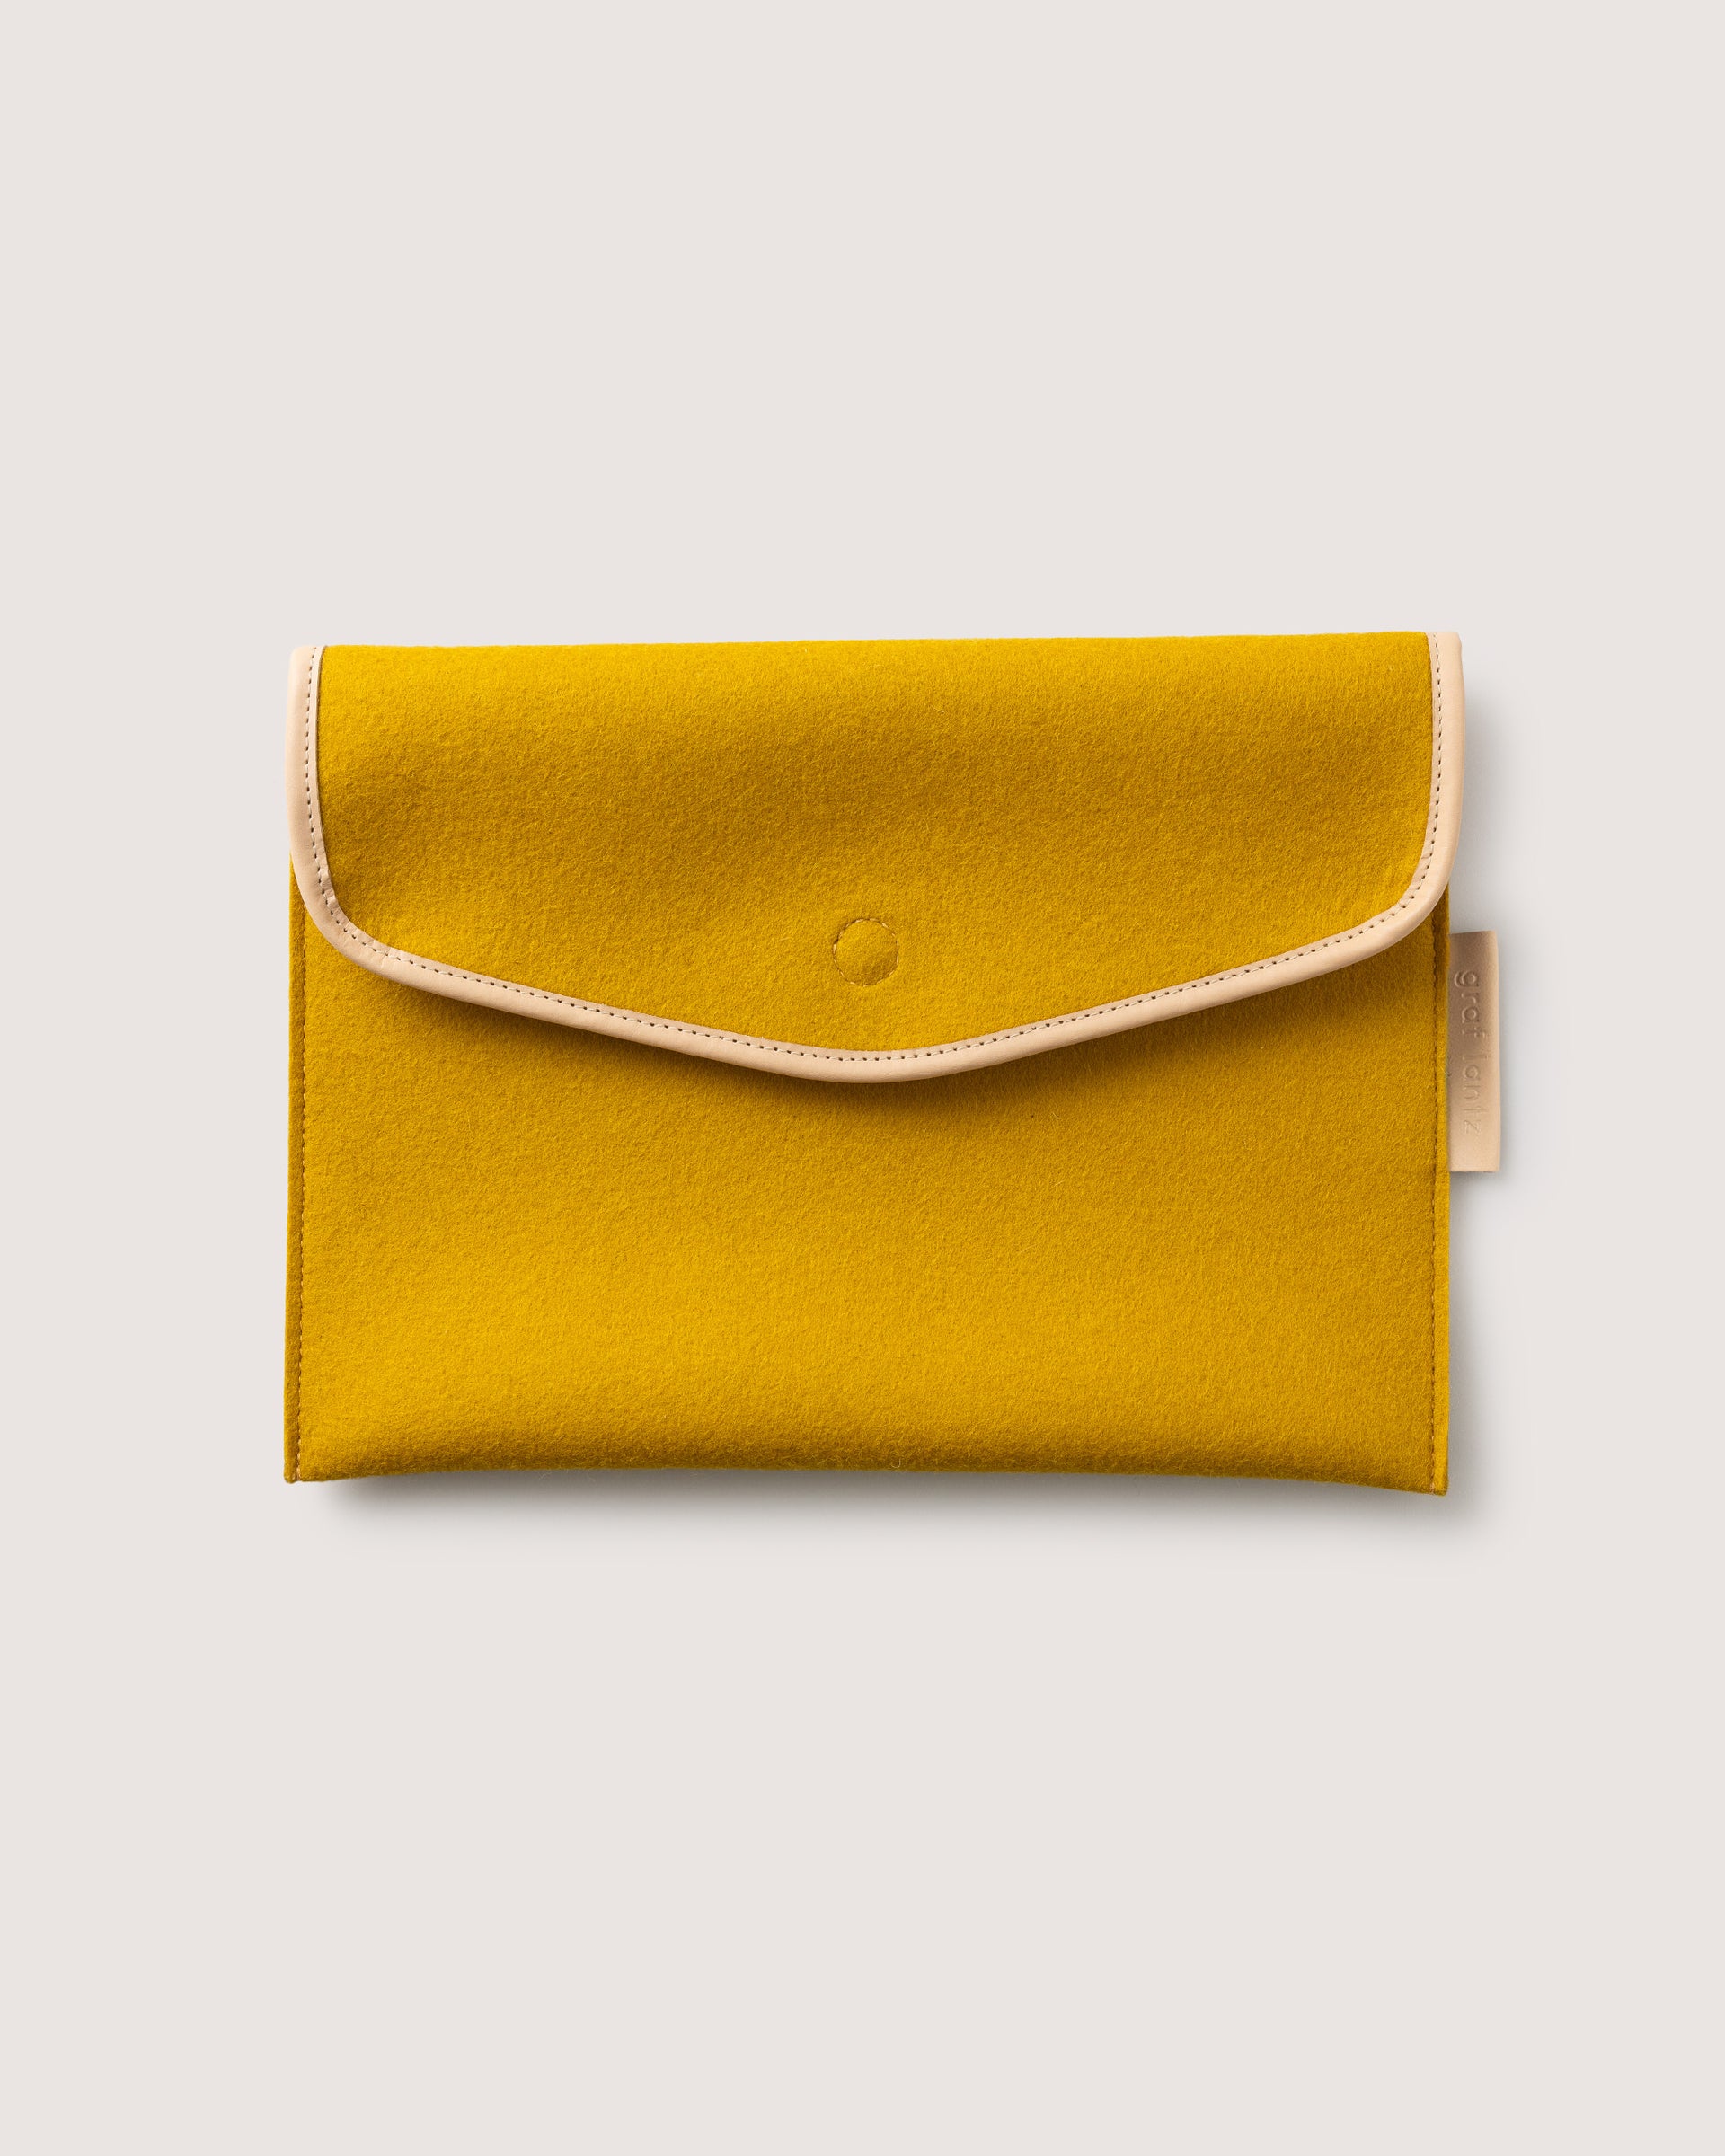 Our elegant 14 inch laptop sleeve. Here in dijon color.